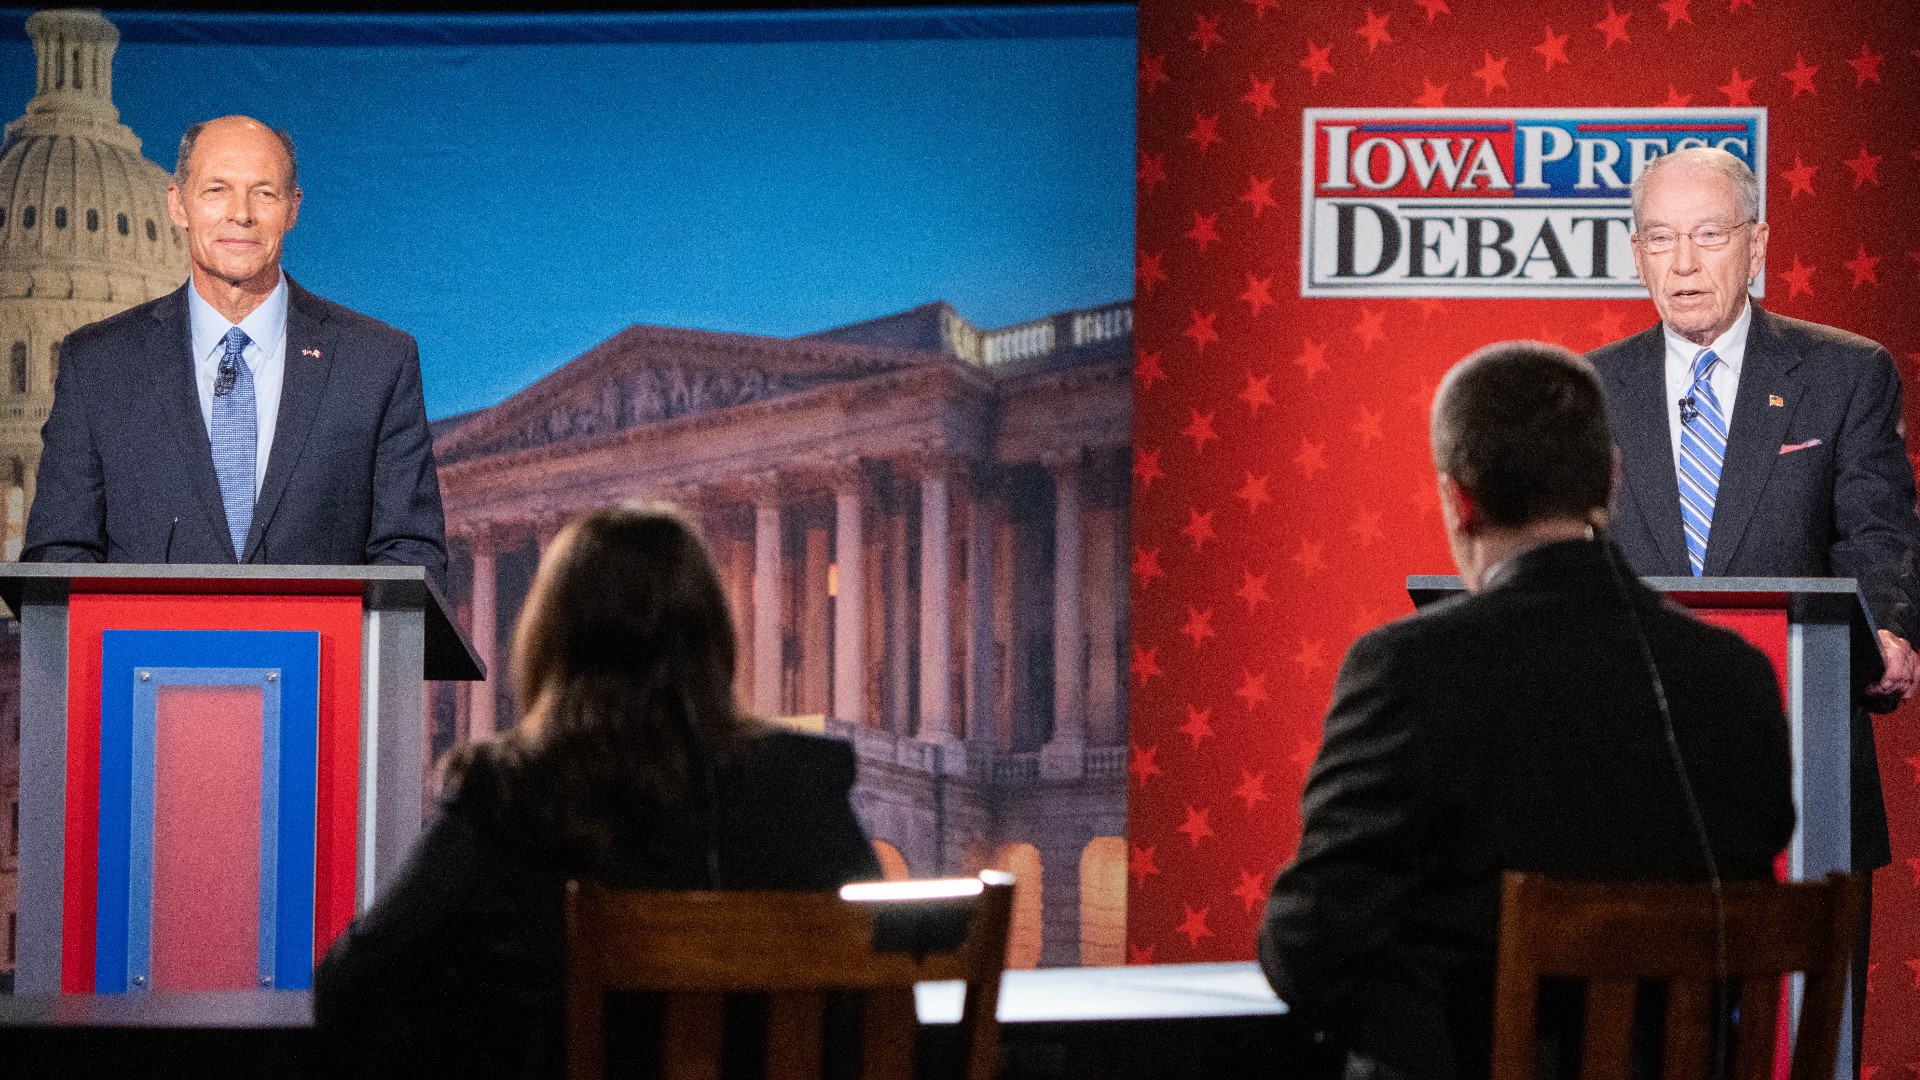 Election night is Tuesday, Nov. 8. We'll have more coverage on the debates tomorrow morning on Good Morning Iowa.